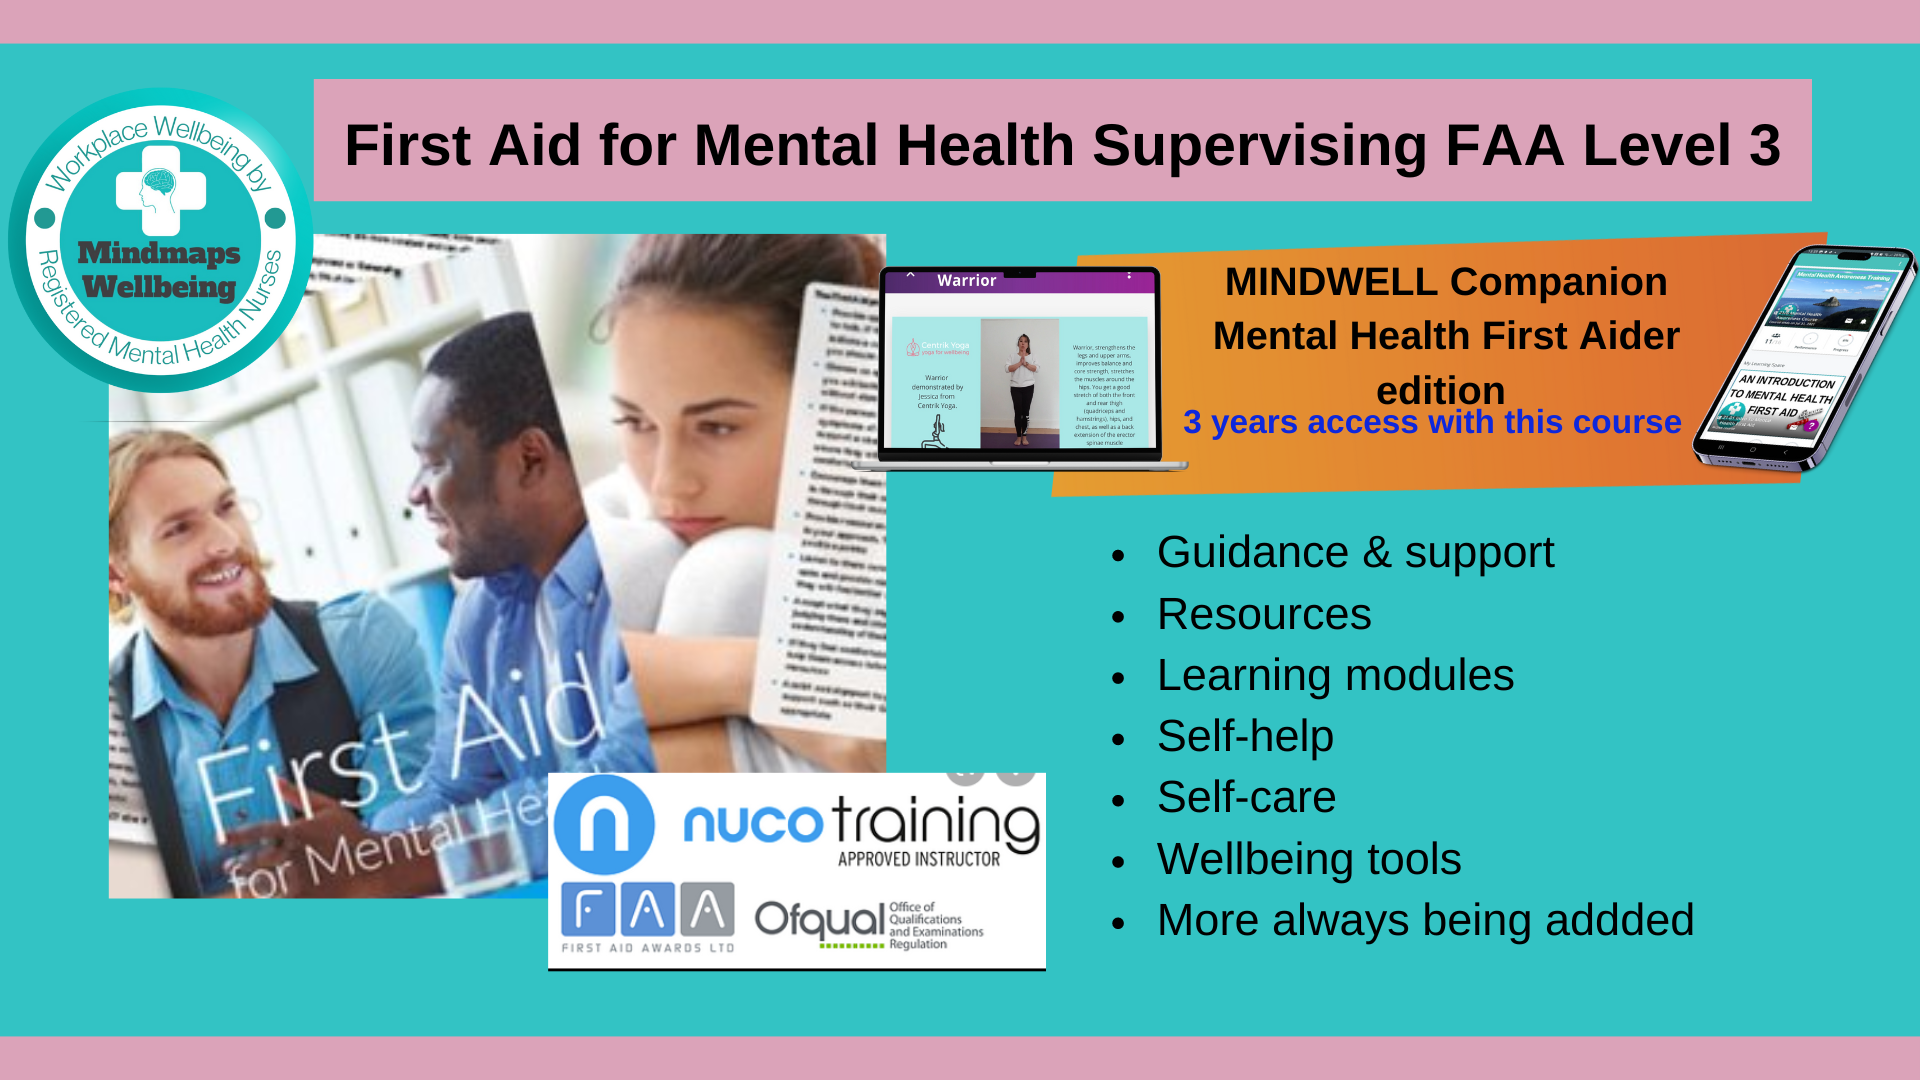 Supervising First Aid for Mental Health FAA Level 3 